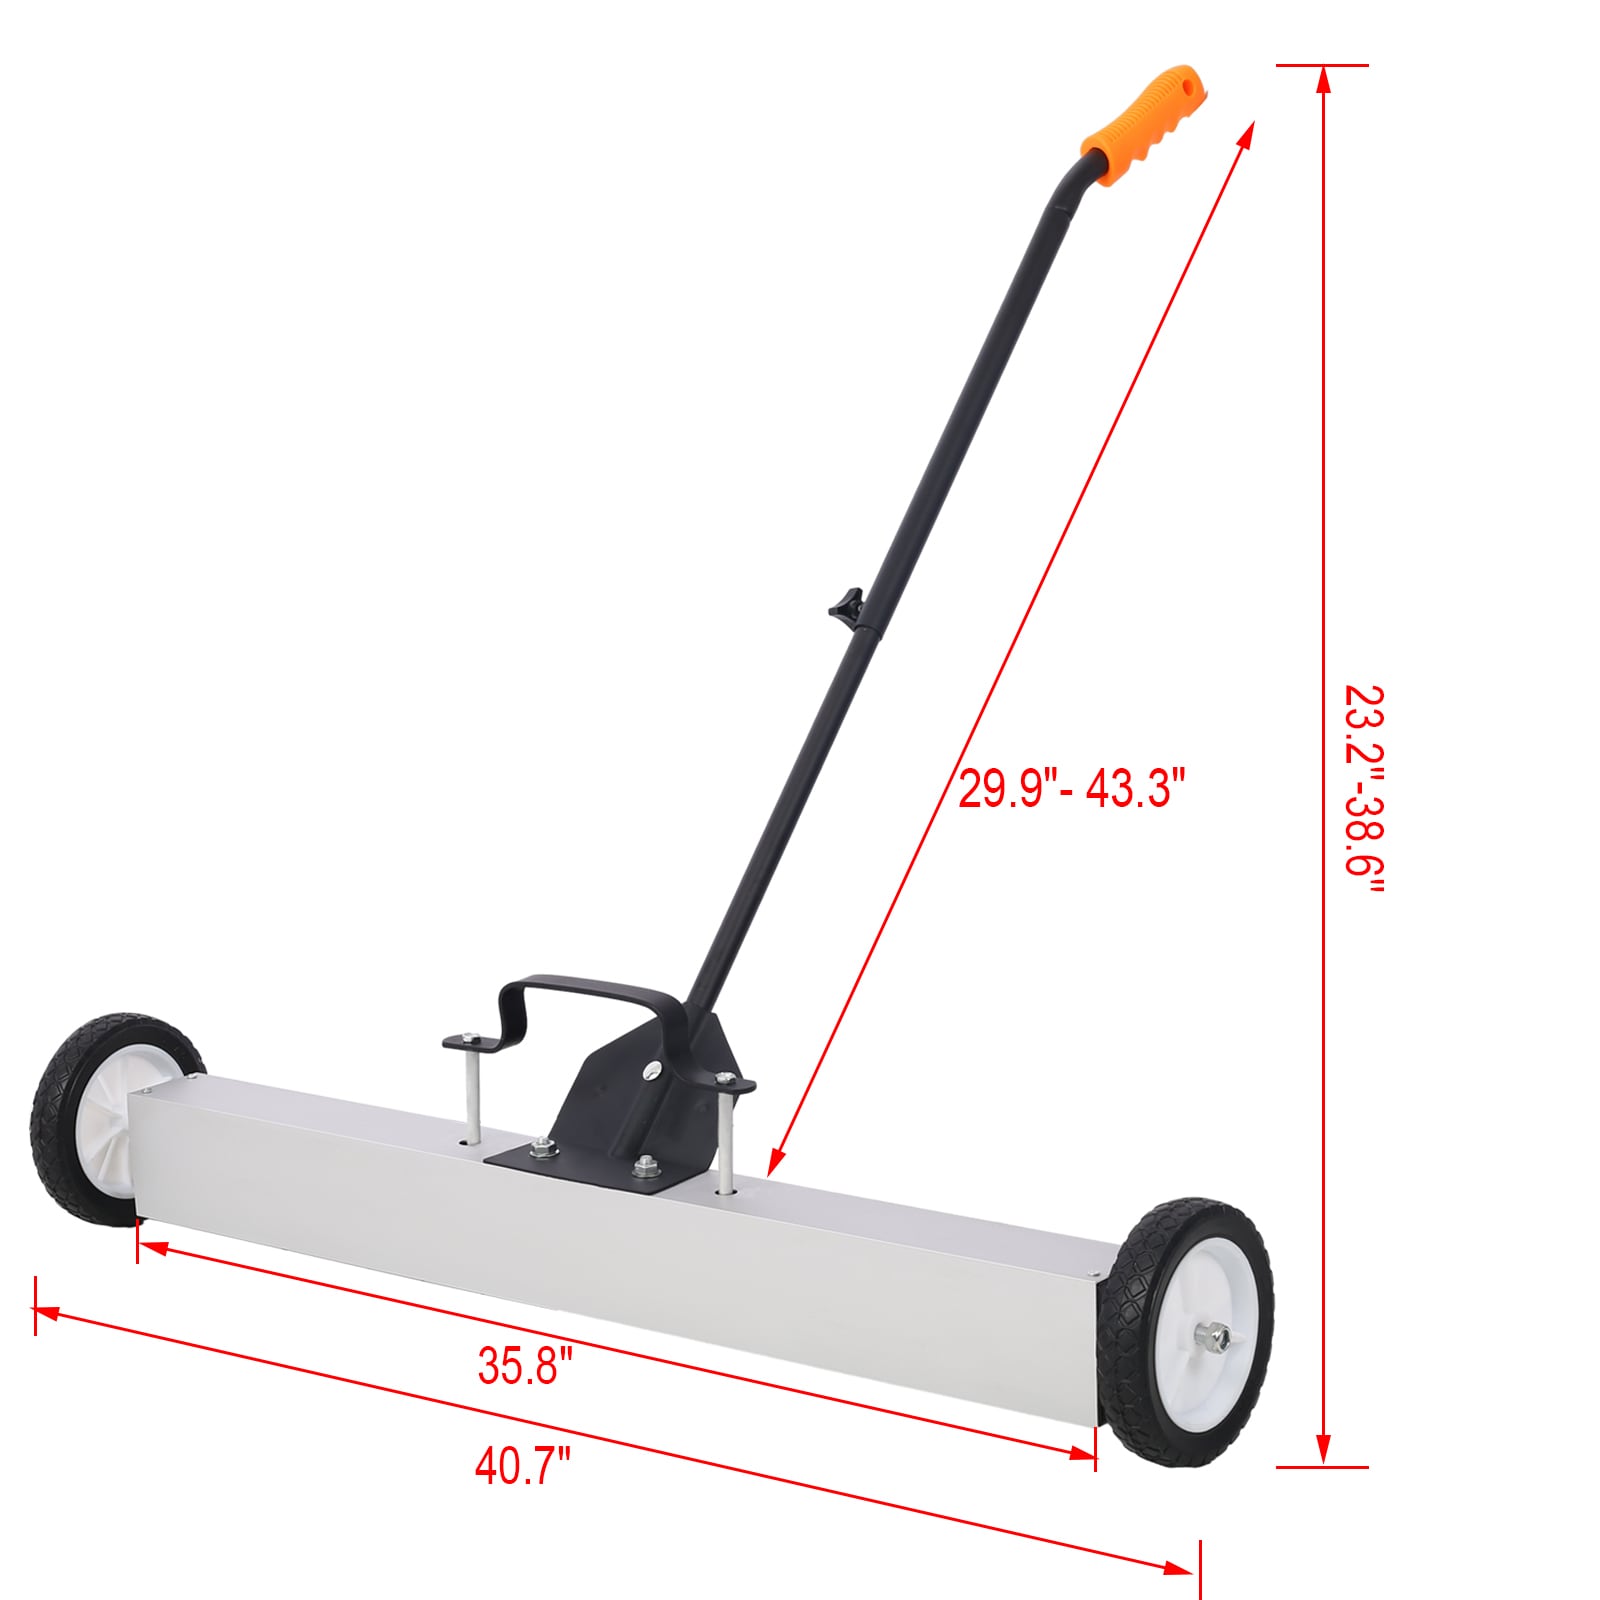 Steel Core 17 in. Mini Magnetic Sweeper at Lowes.com